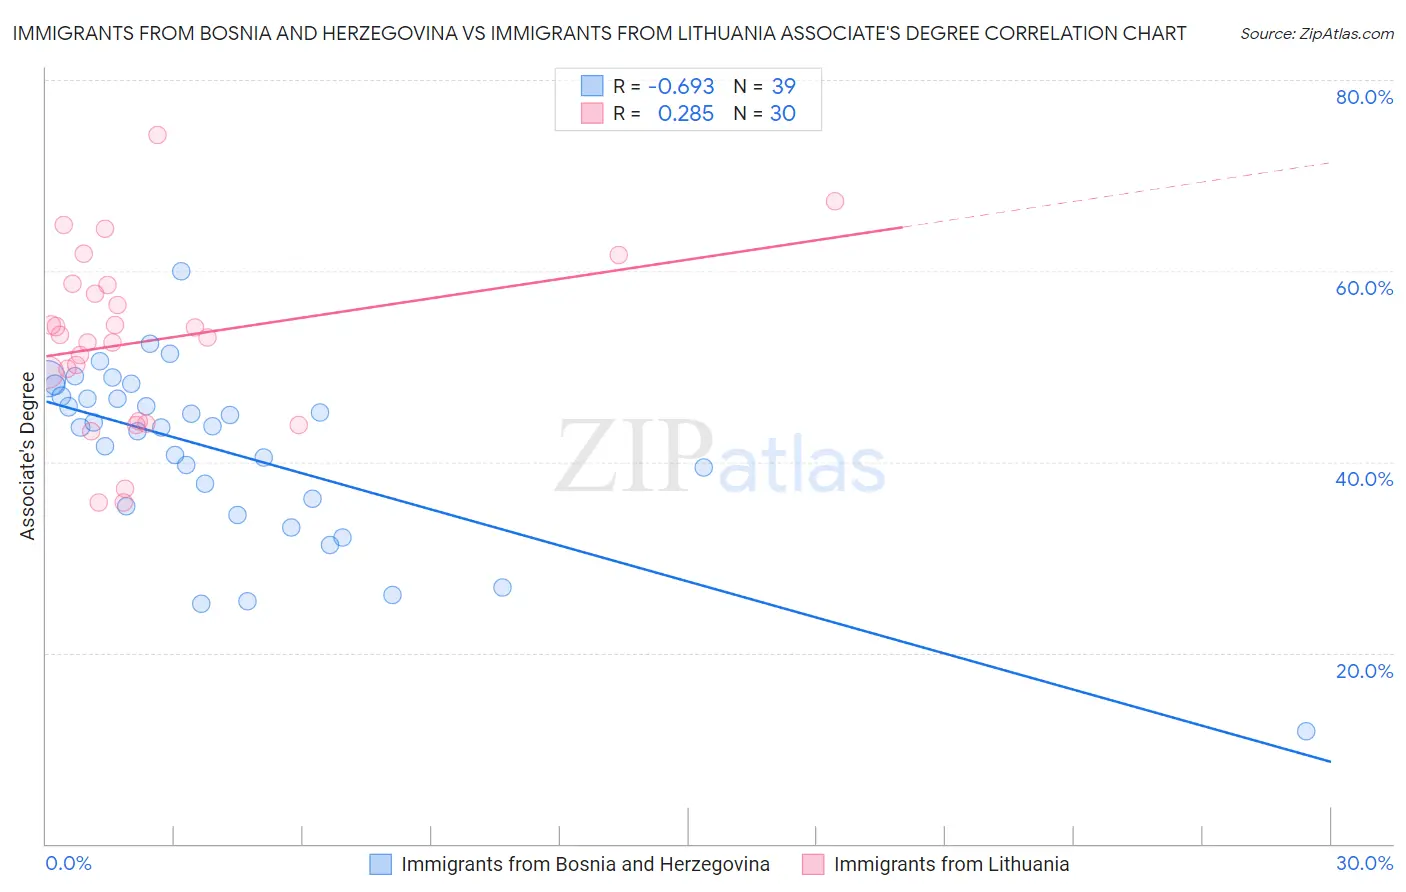 Immigrants from Bosnia and Herzegovina vs Immigrants from Lithuania Associate's Degree